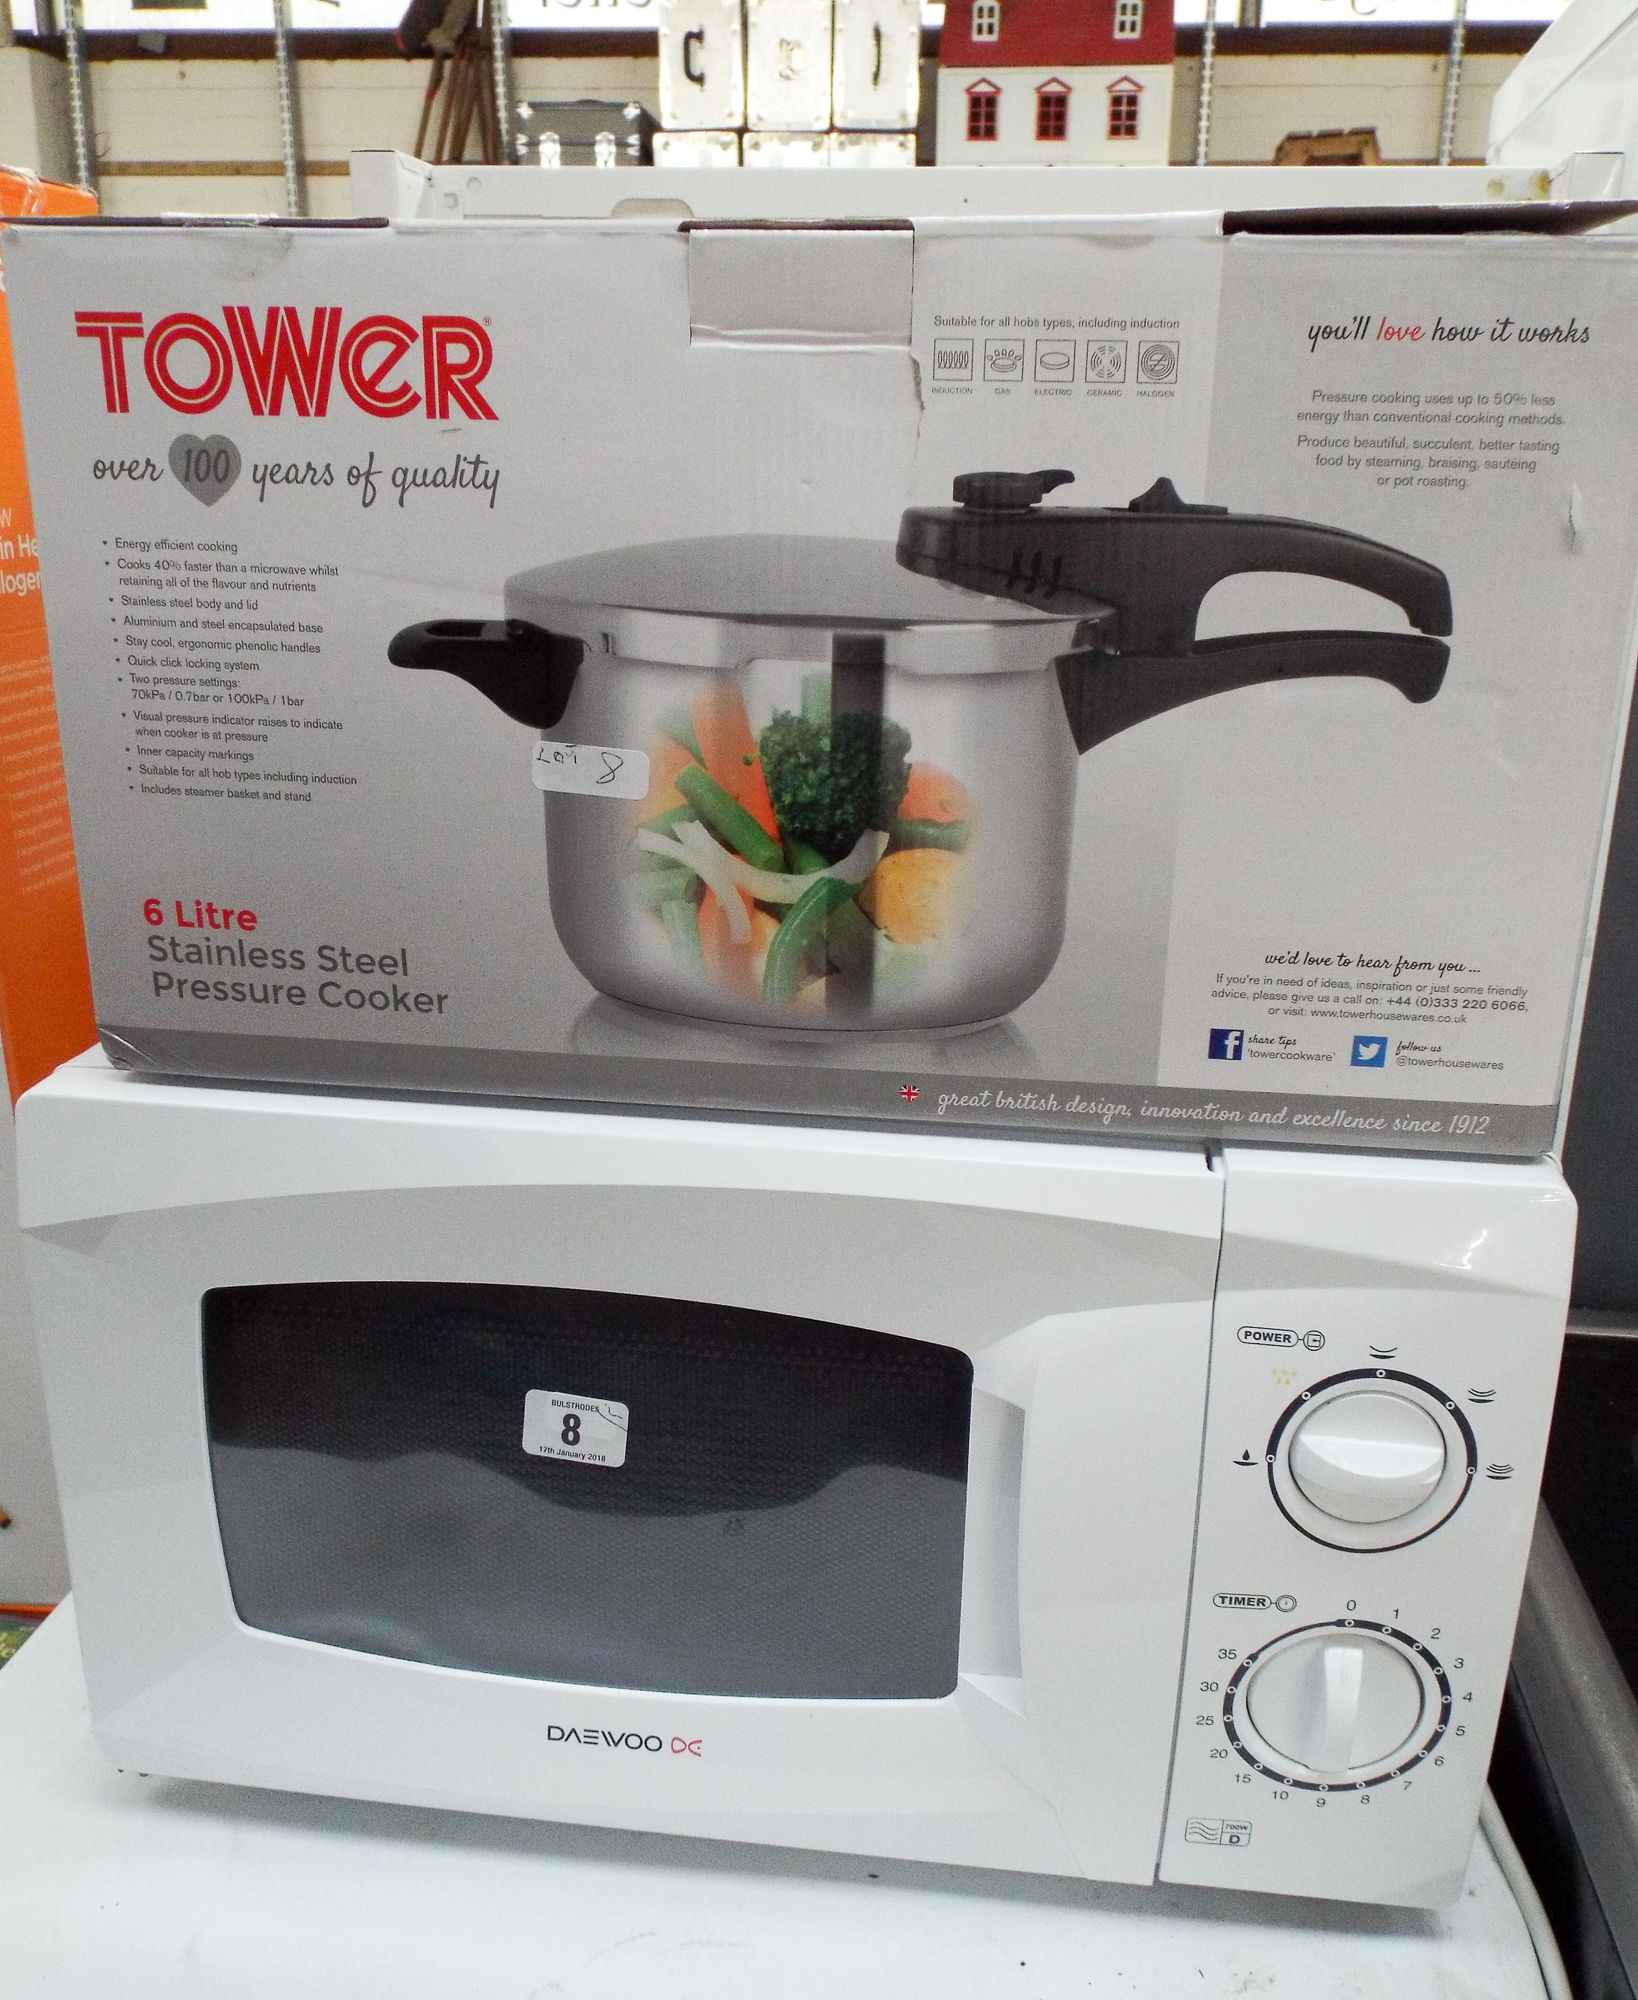 A Daewoo microwave oven in a white case and a six litre stainless steel pressure cooker